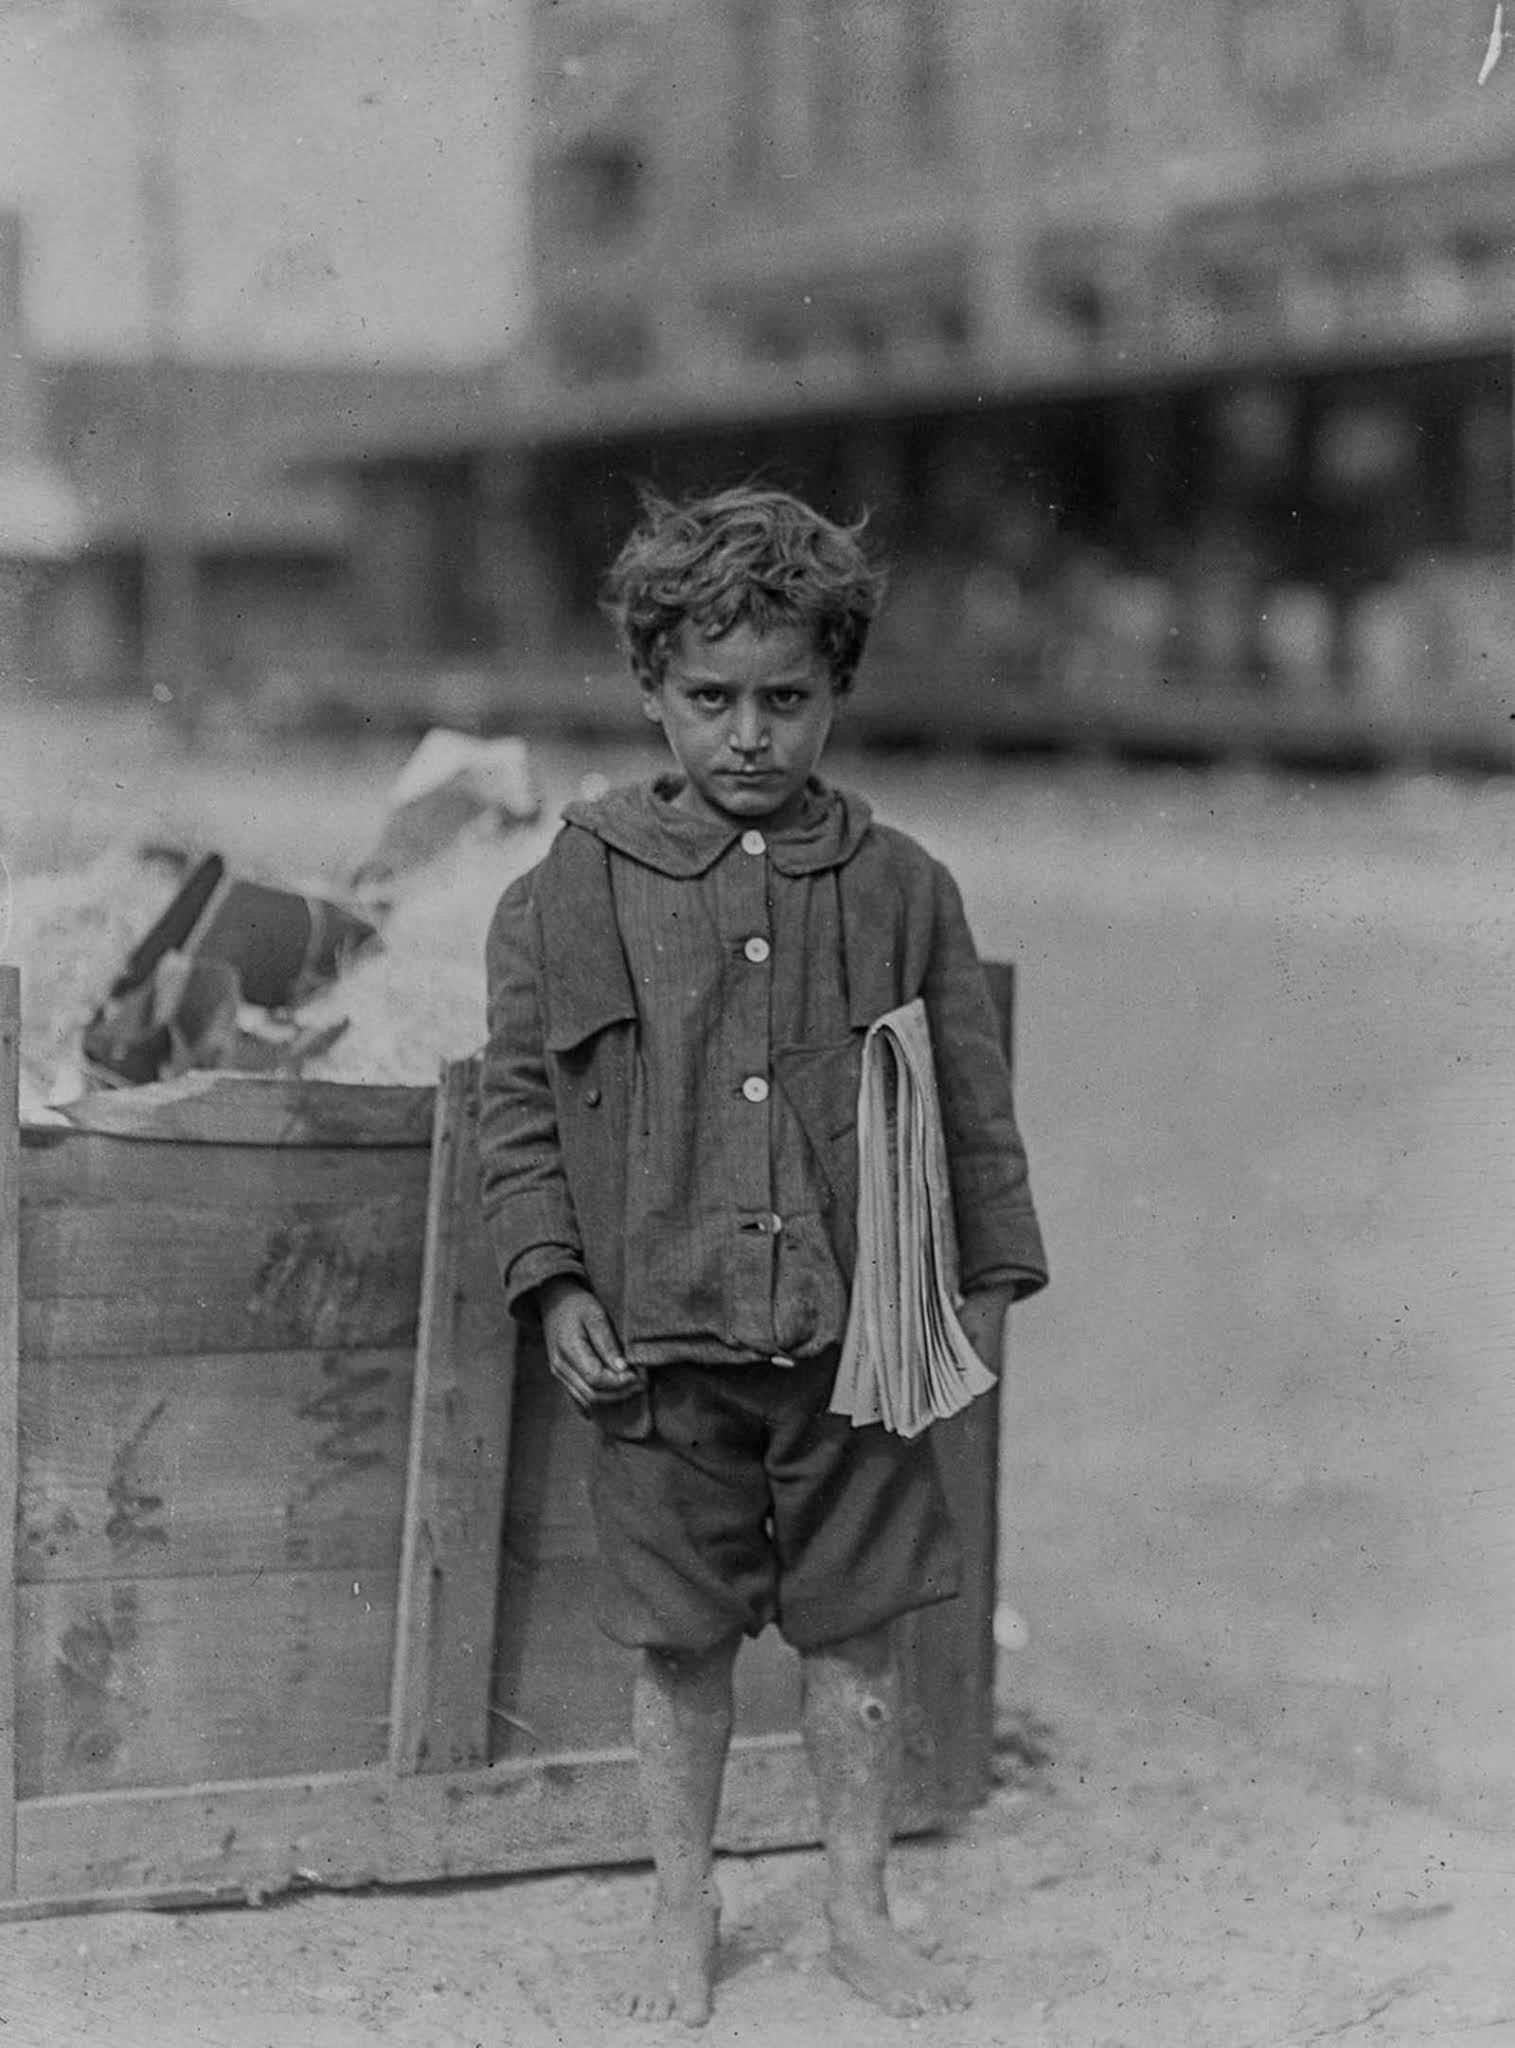 One of America’s youngest newsboys. Four years old and regular seller. Tampa, Florida, 1913.